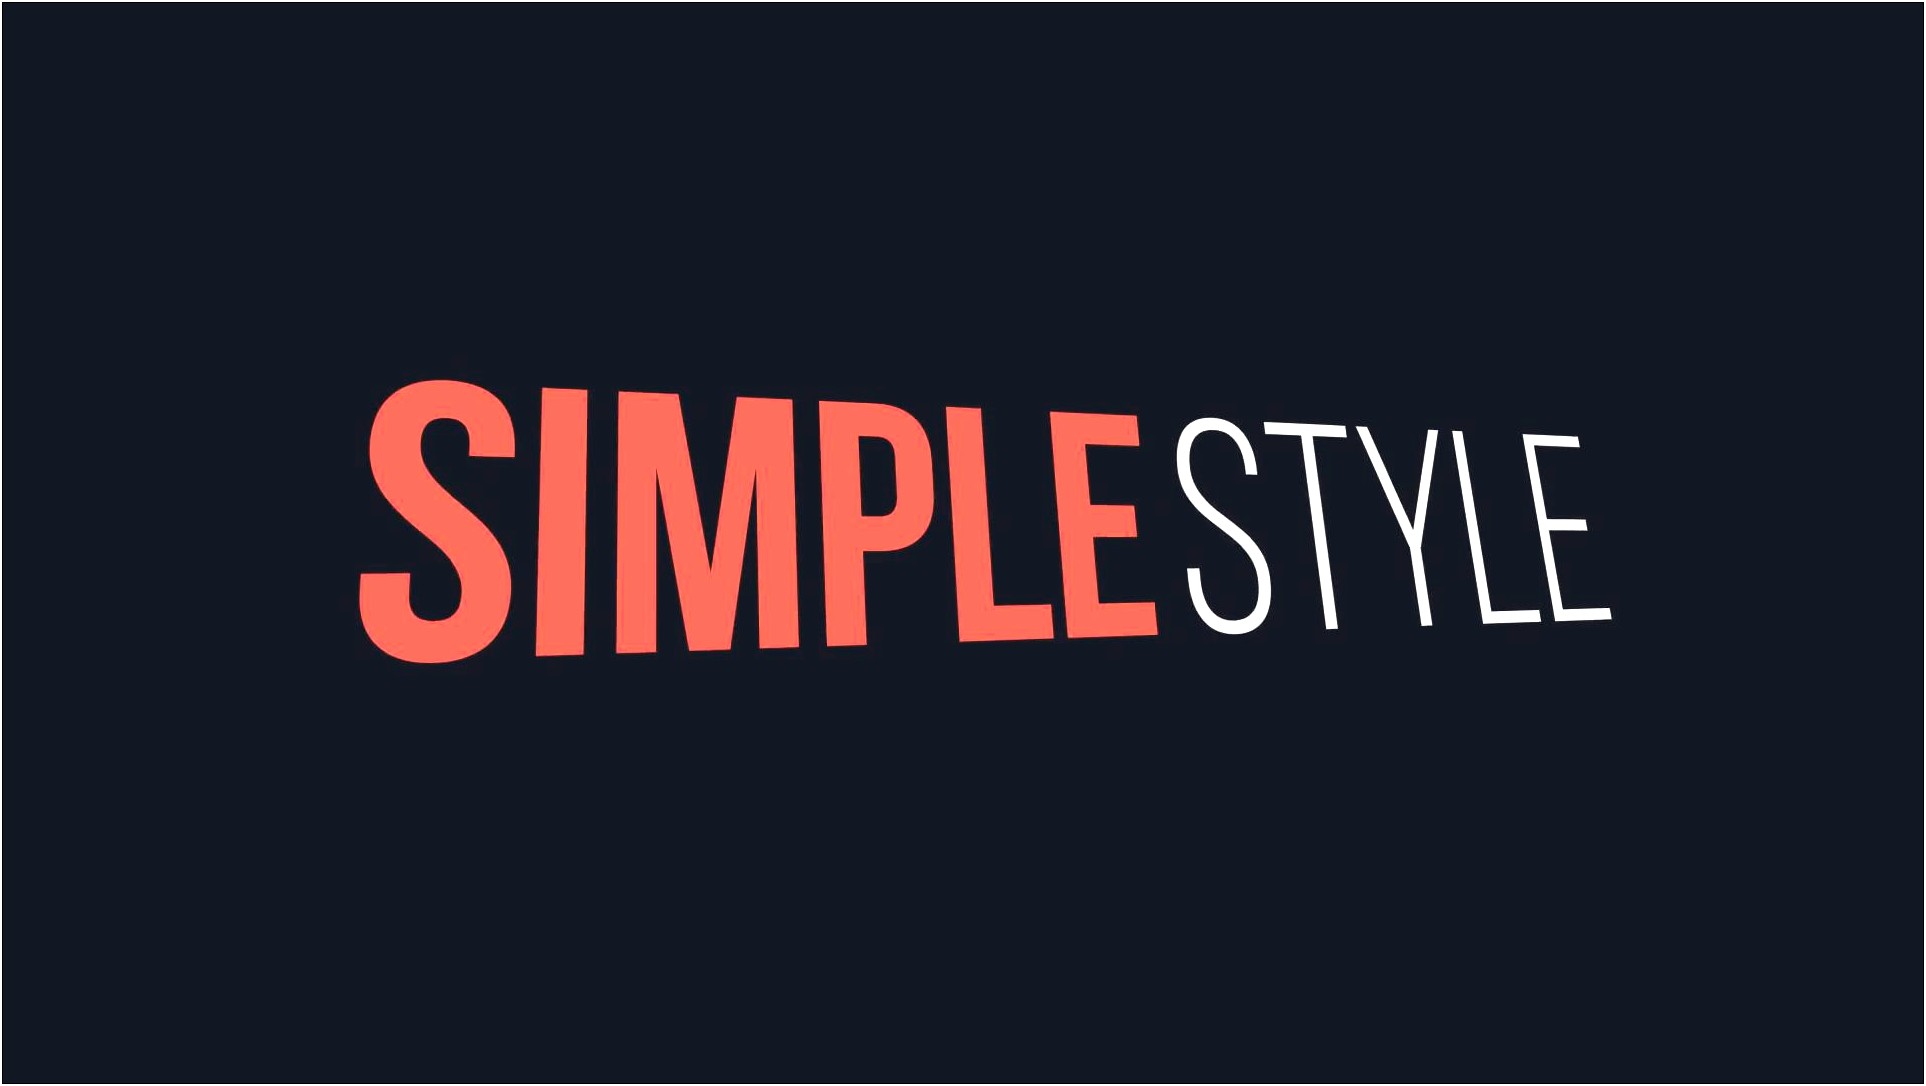 Prima Type Free After Effects Typography Template